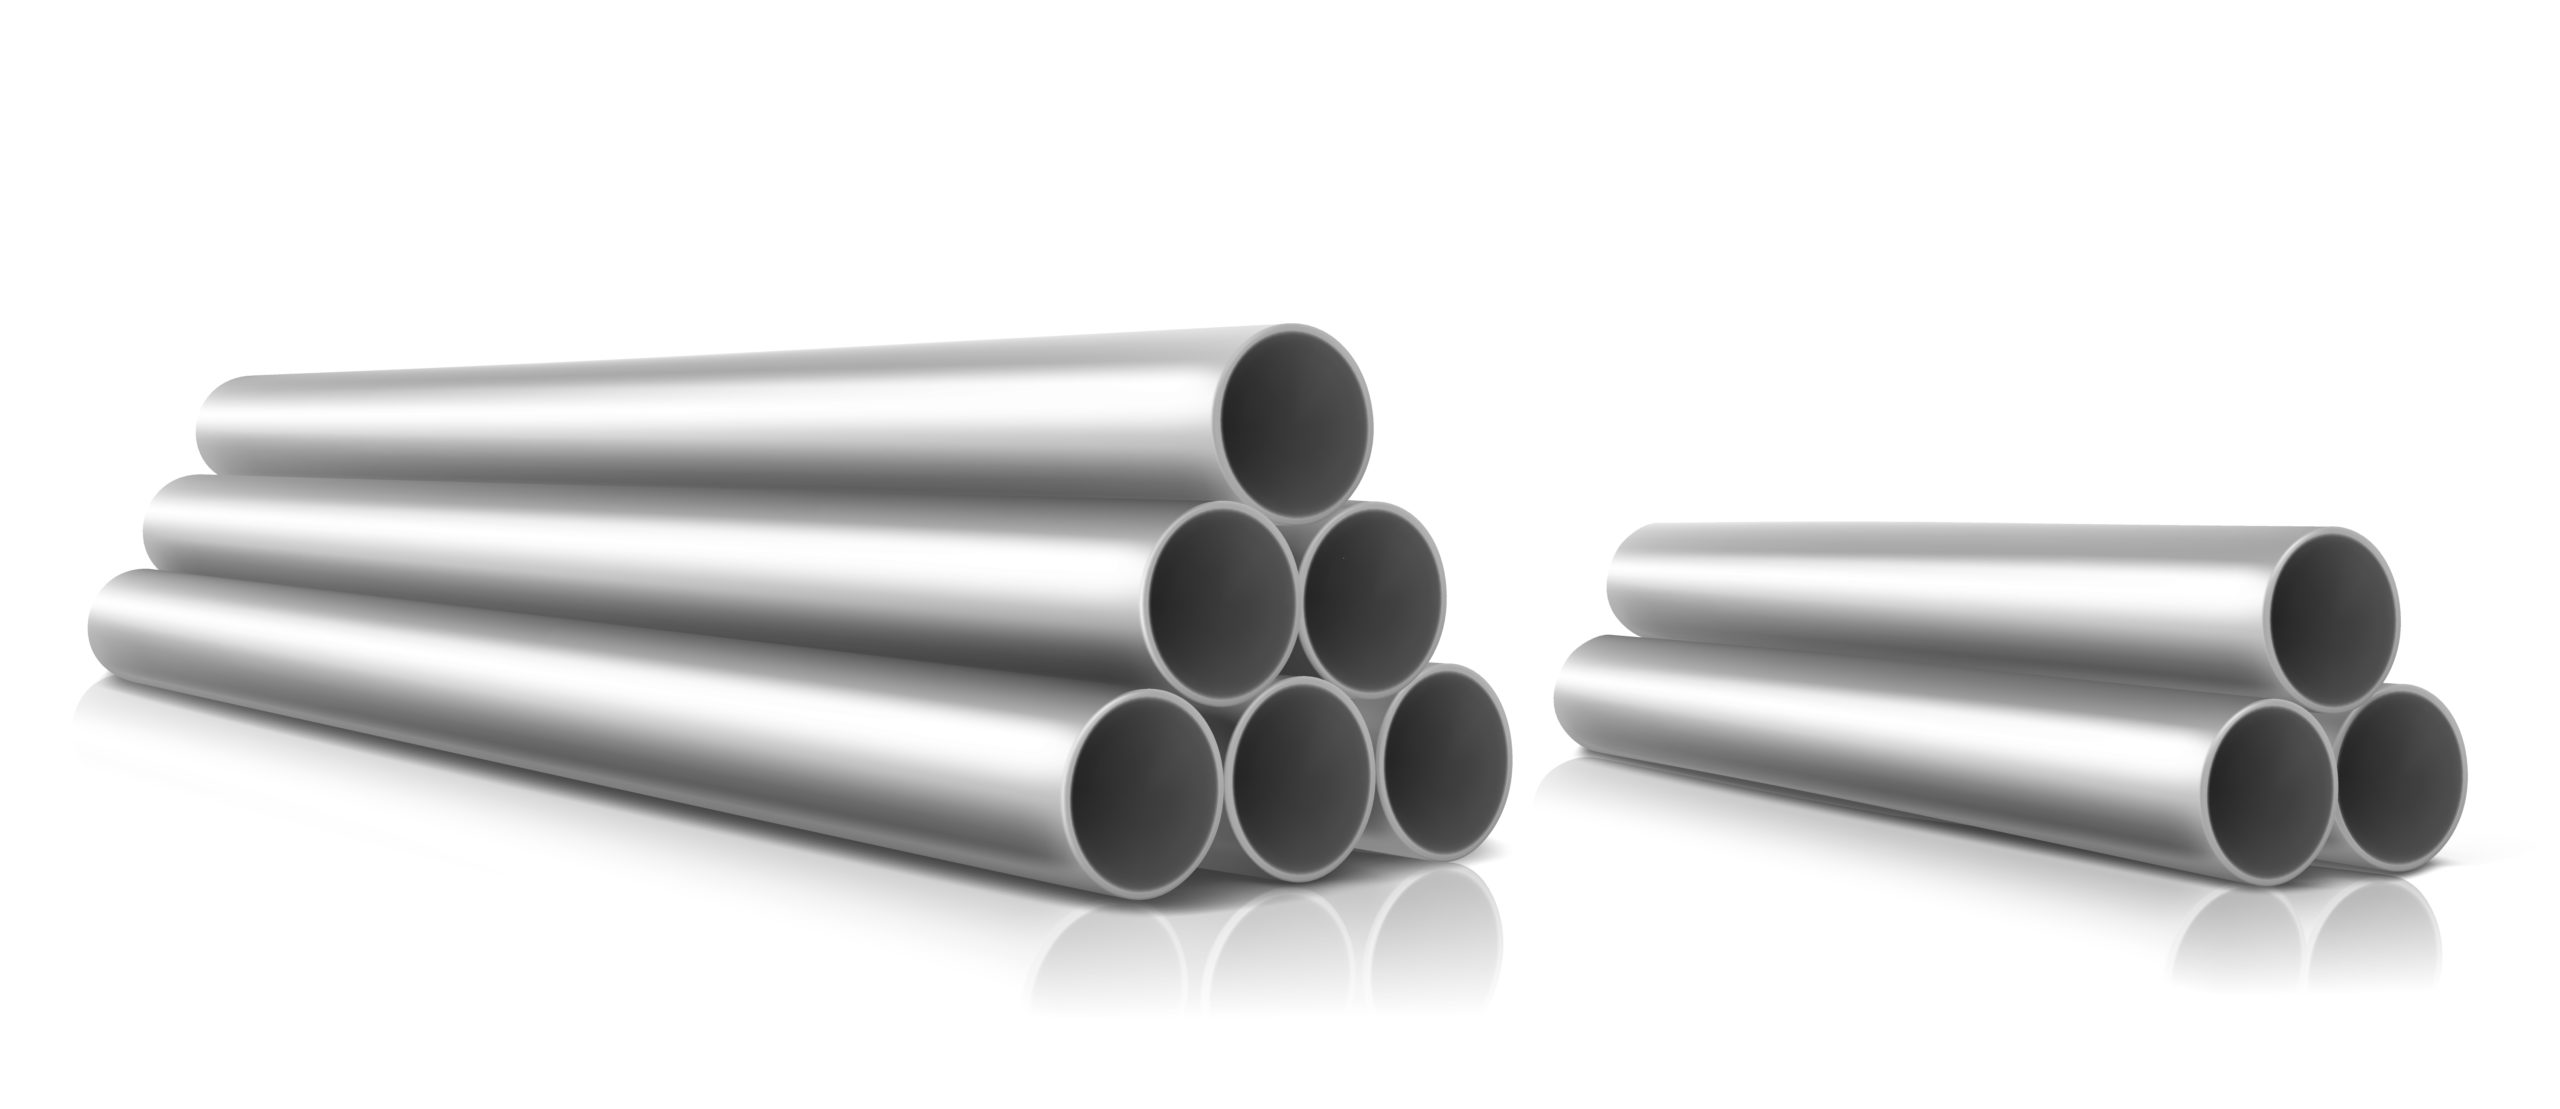 Steel Pipes Application in Construction- The Details